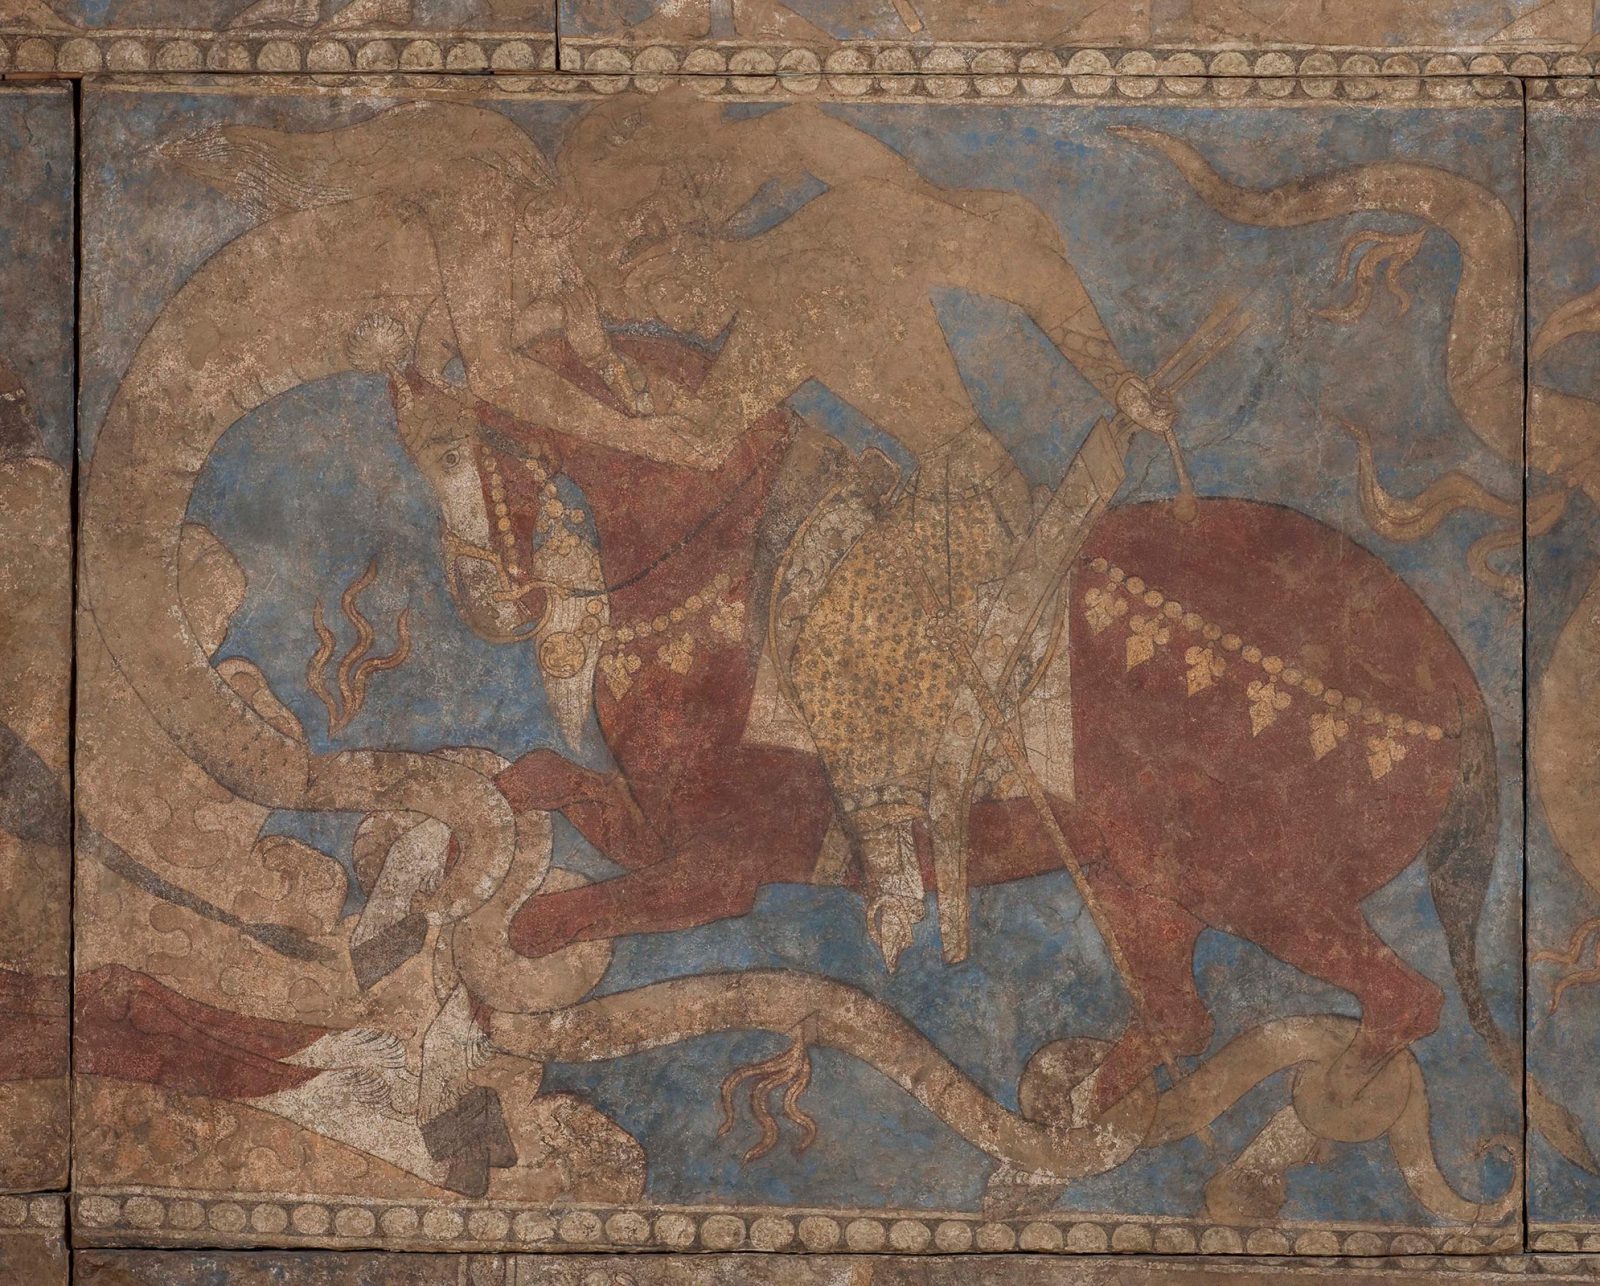 Fig. 28 Detail: Episode 3. Rustam is in great peril as he fights a dragon that has coiled itself around Rakhsh’s legs, pulling Rustam toward its gaping mouth. The painting does not show Rustam’s escape from this dire situation, but part of the Sogdian text offers a version of how he did: “Rustam turned back, attacked the demons like a fierce lion upon its prey or a hyena upon the flock, like a falcon upon a hare or a porcupine upon a snake, and began to destroy them.”
